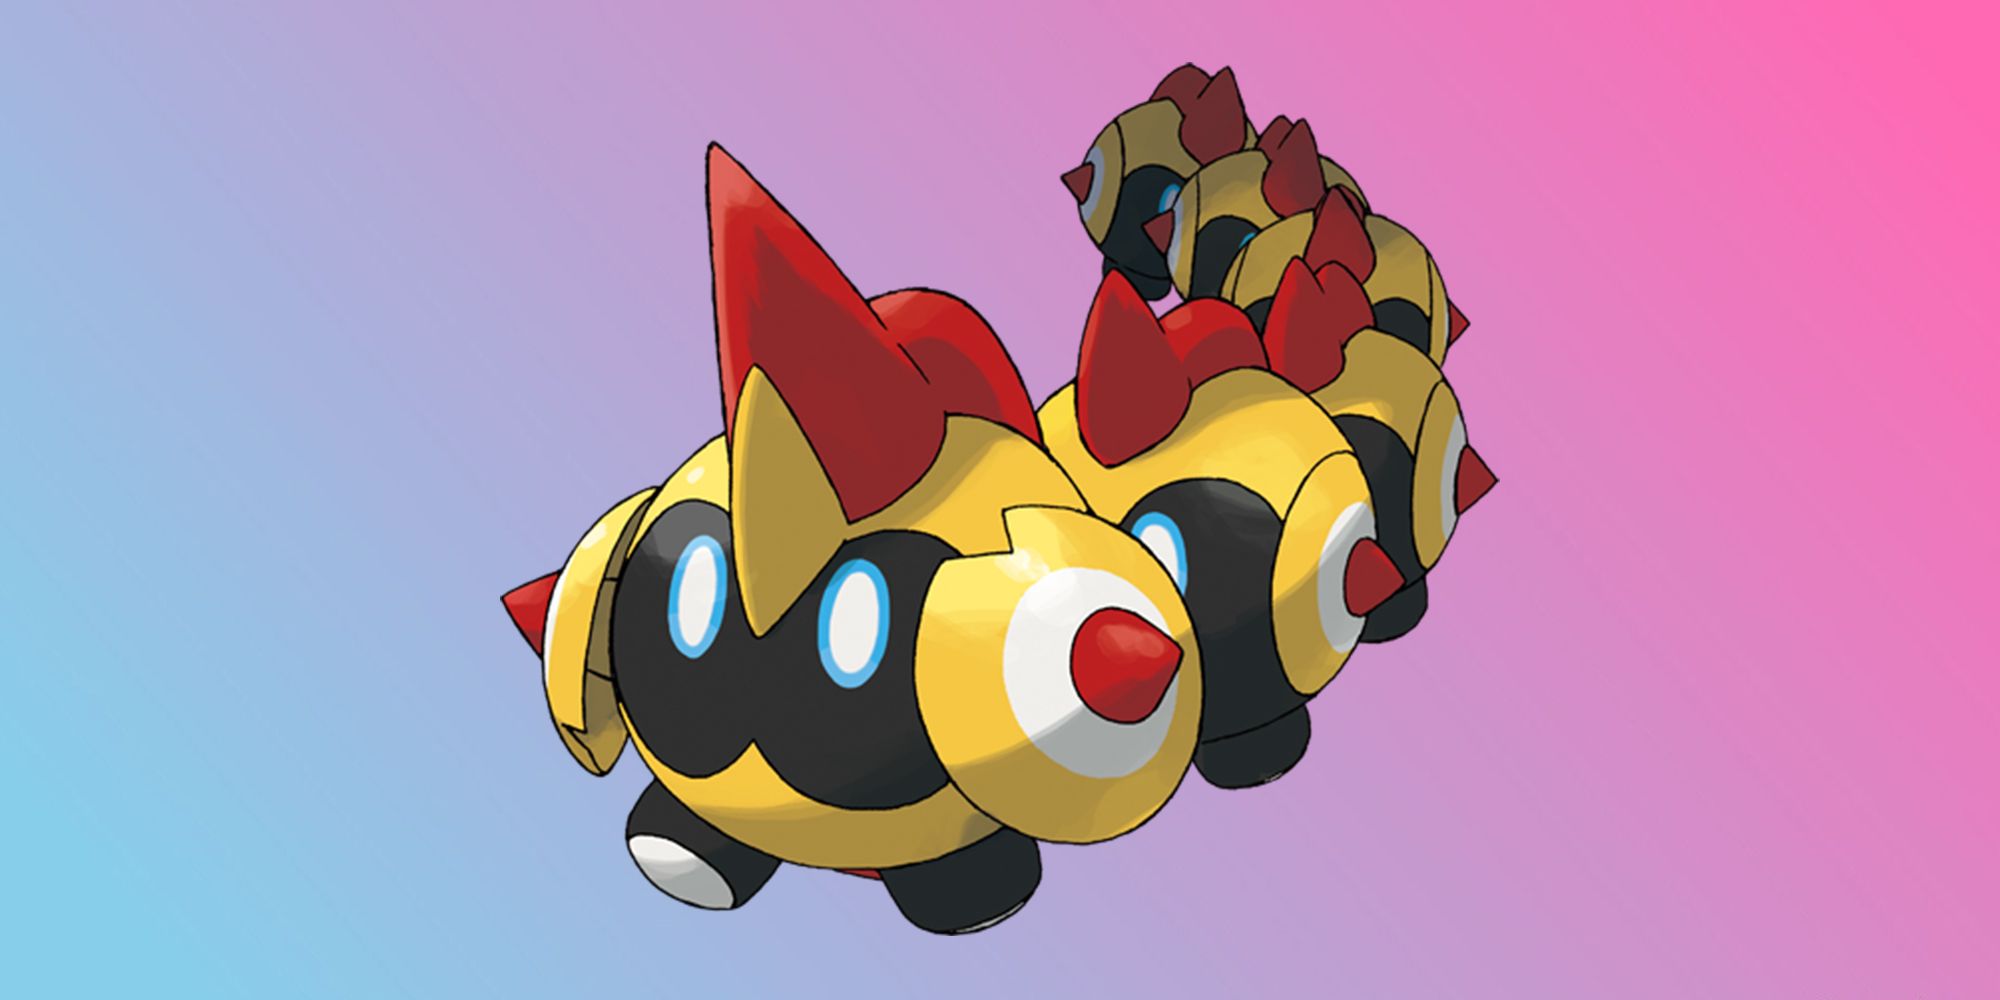 The Pokémon Falinks appears in official artwork in front of a blue and pink gradiant background